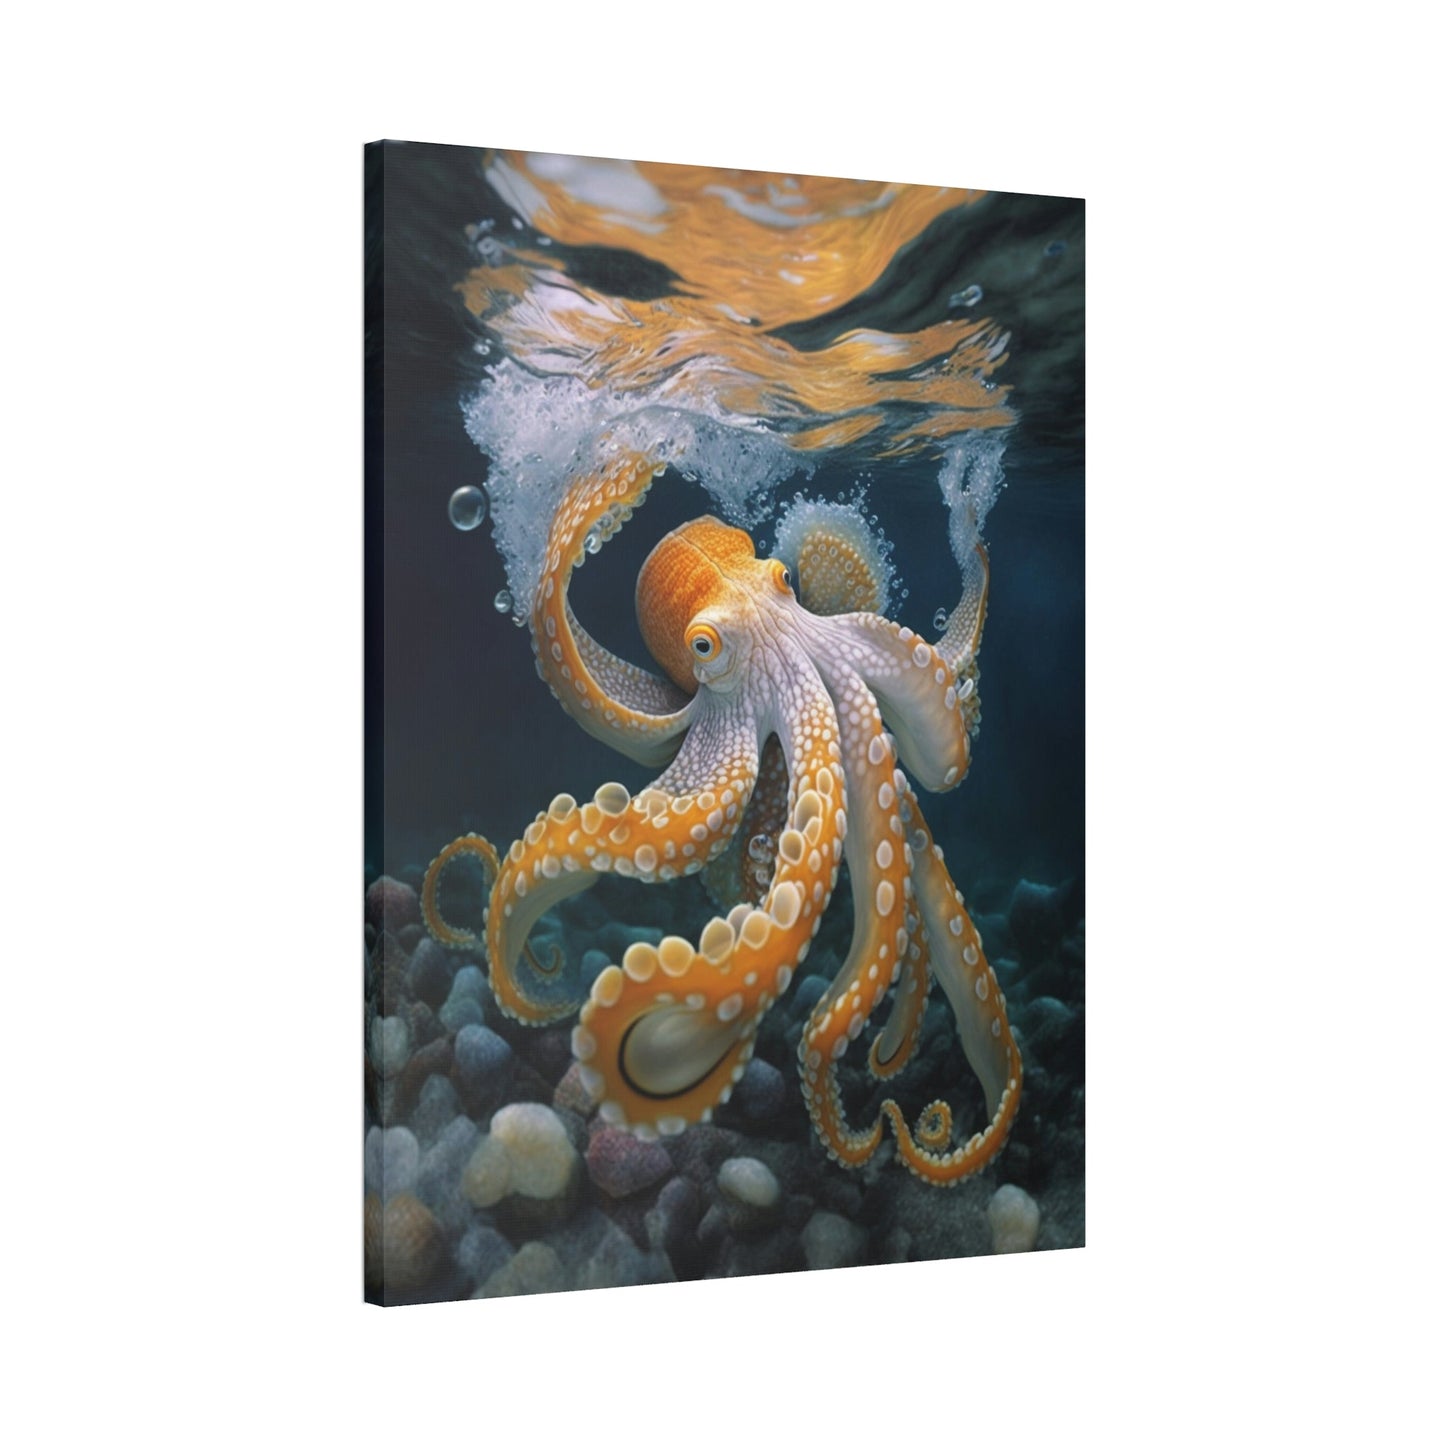 Octopus Wonderland: A Dreamy and Surreal Painting on Canvas